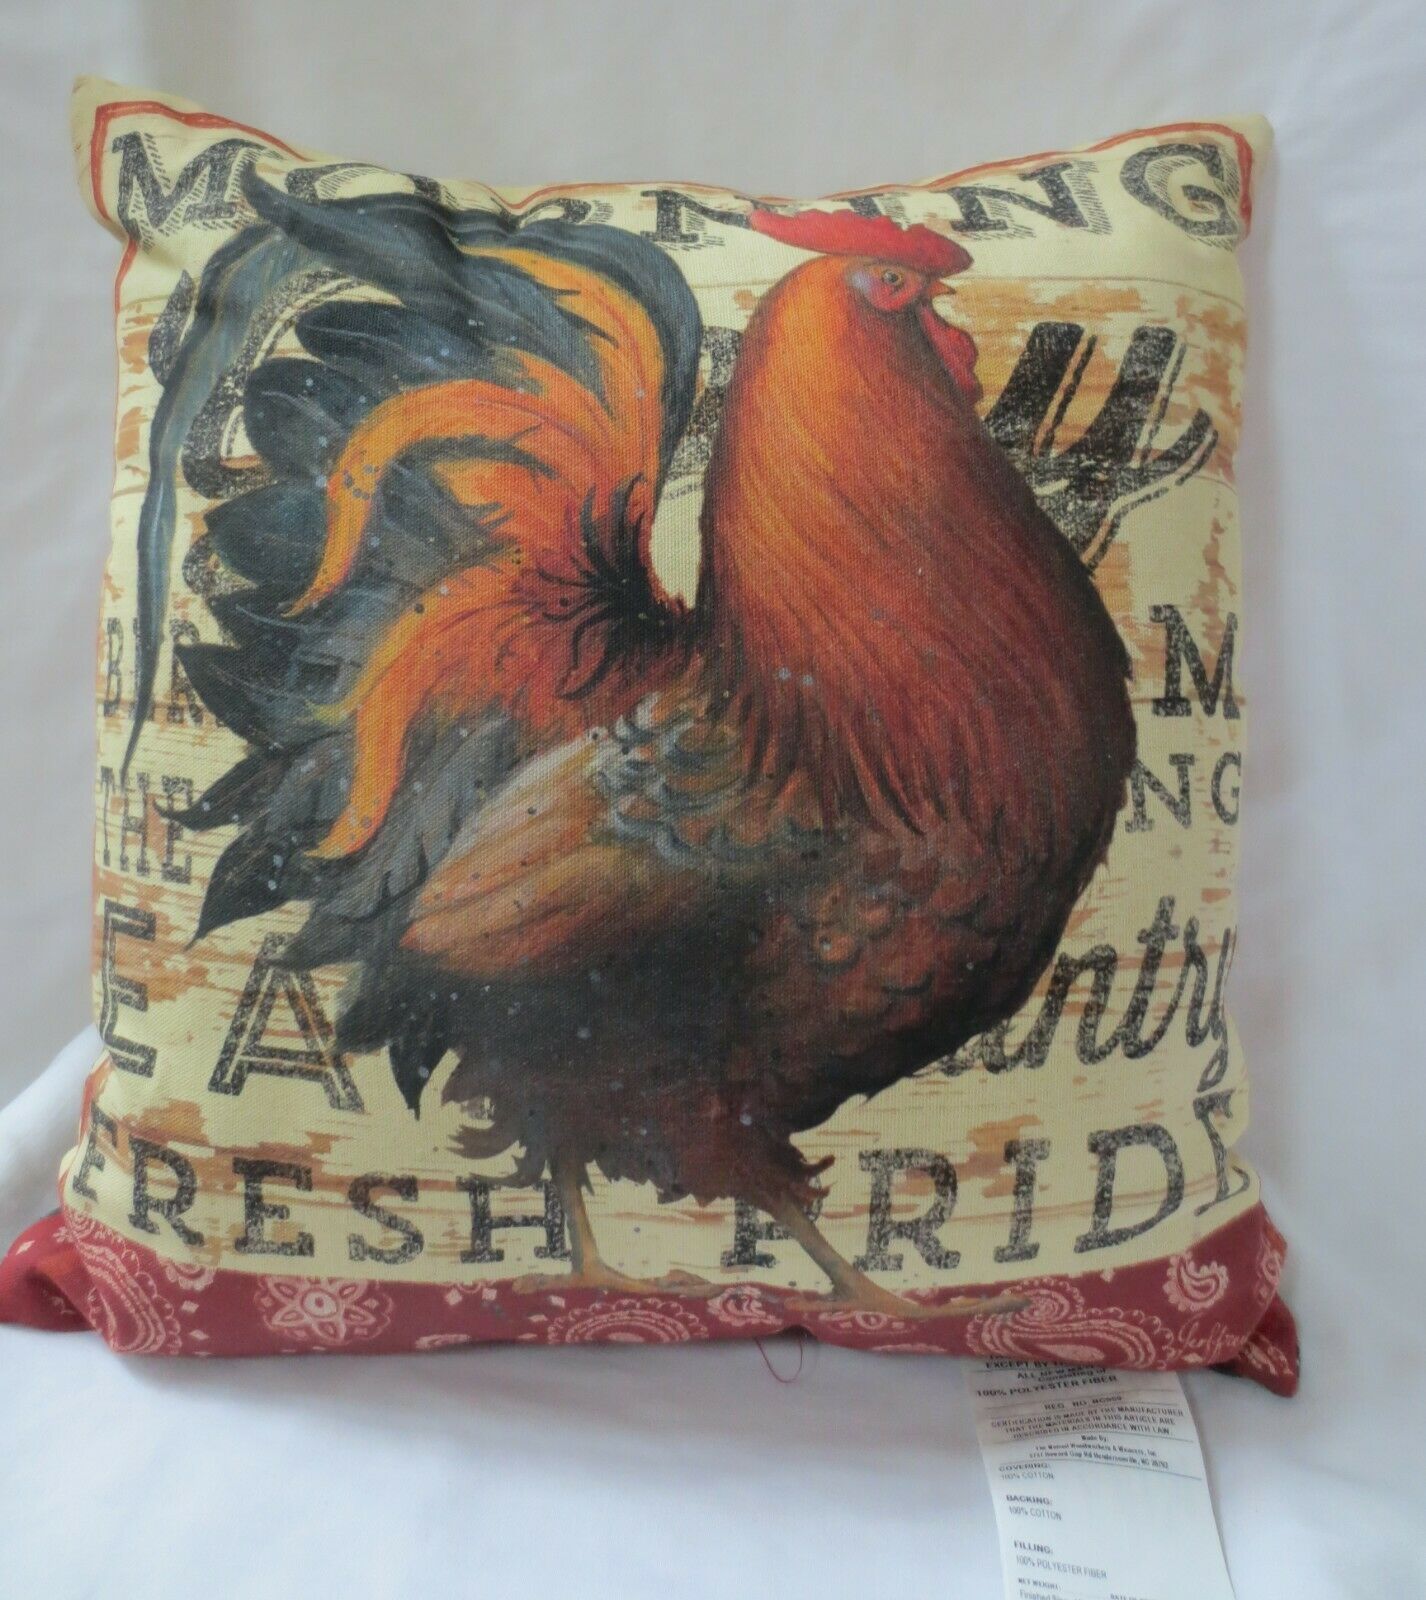 Colorful Rooster Decorative  Pillows Country Farmhouse or Rustic Decor 18" Sq - $15.00